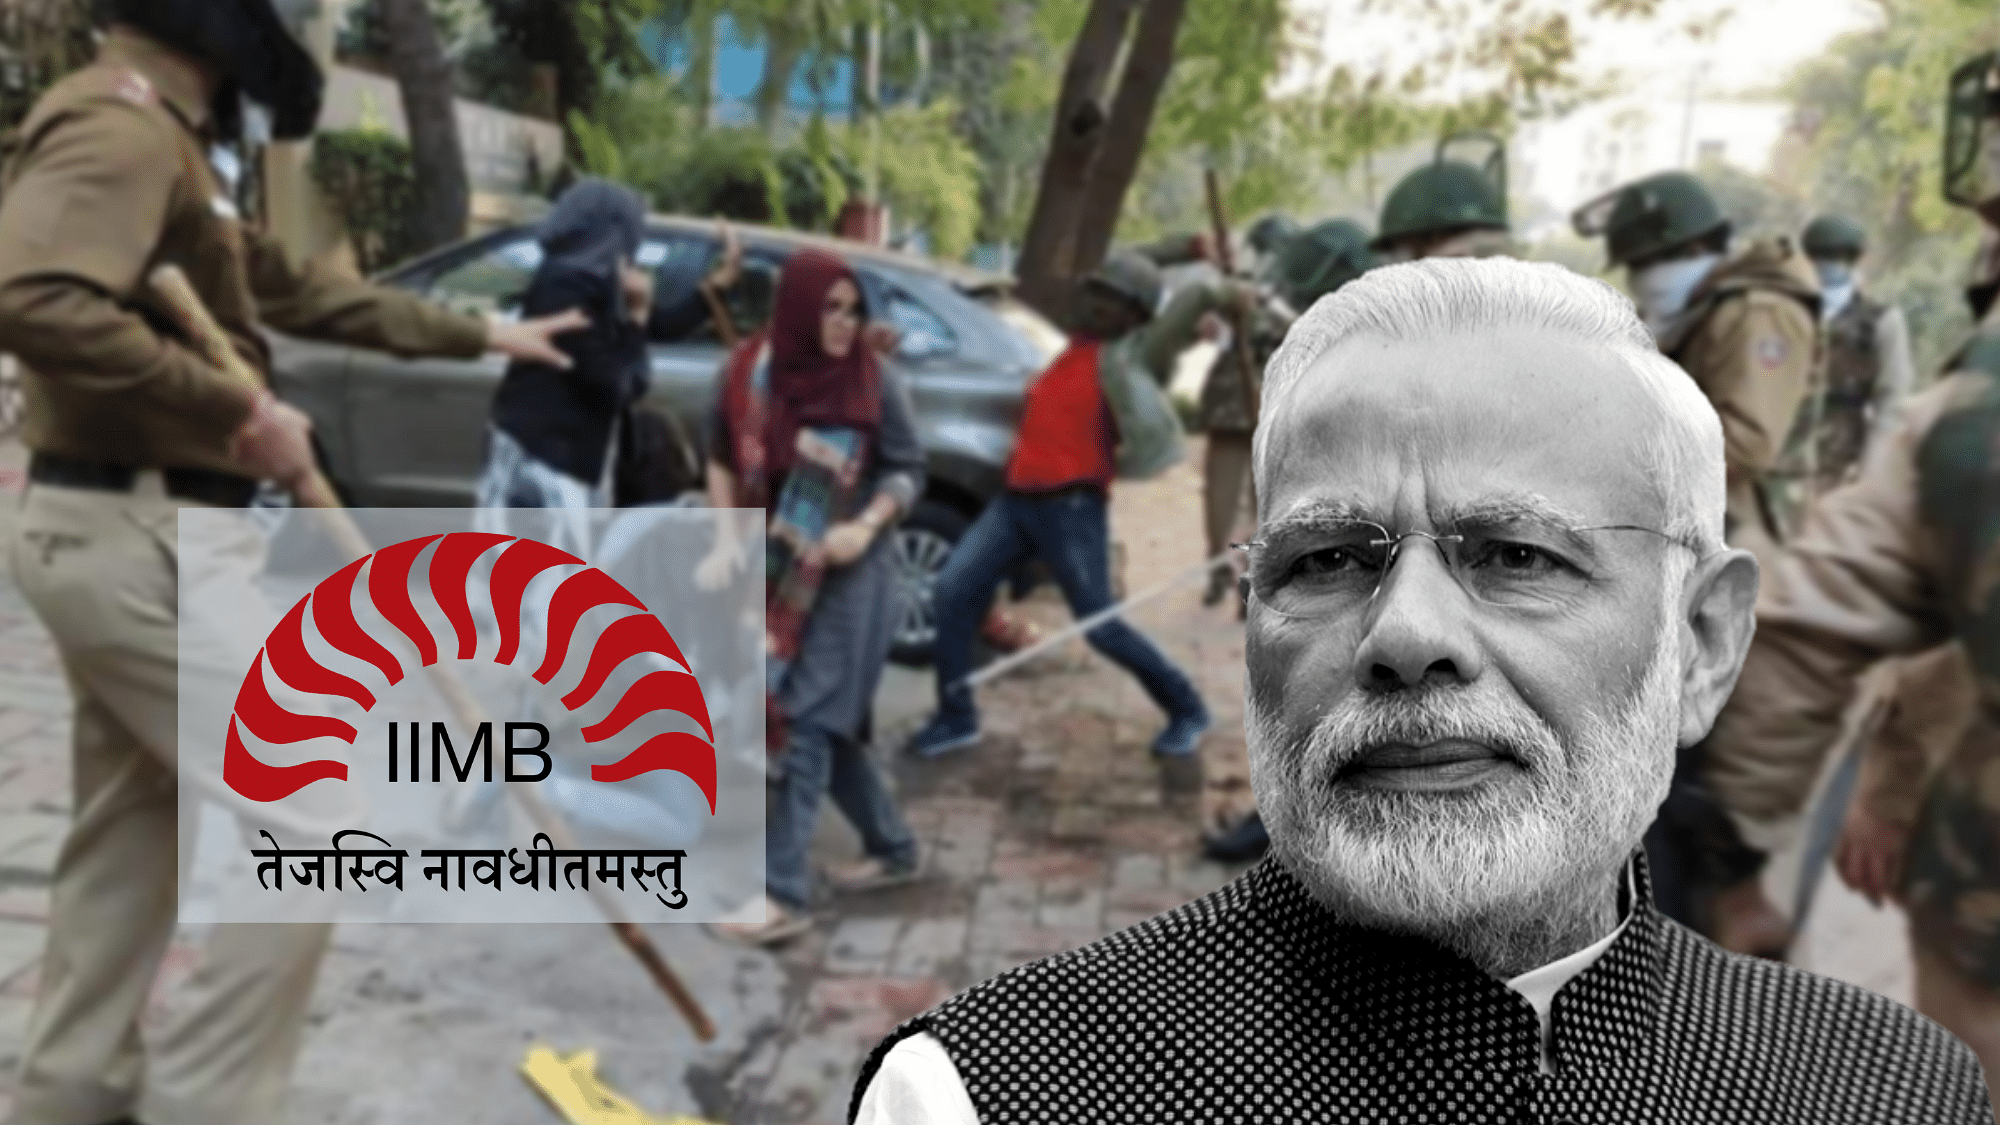 The letter asks Modi to “not trample the democratic rights of citizens to peacefully protest an unjust law (CAA).”